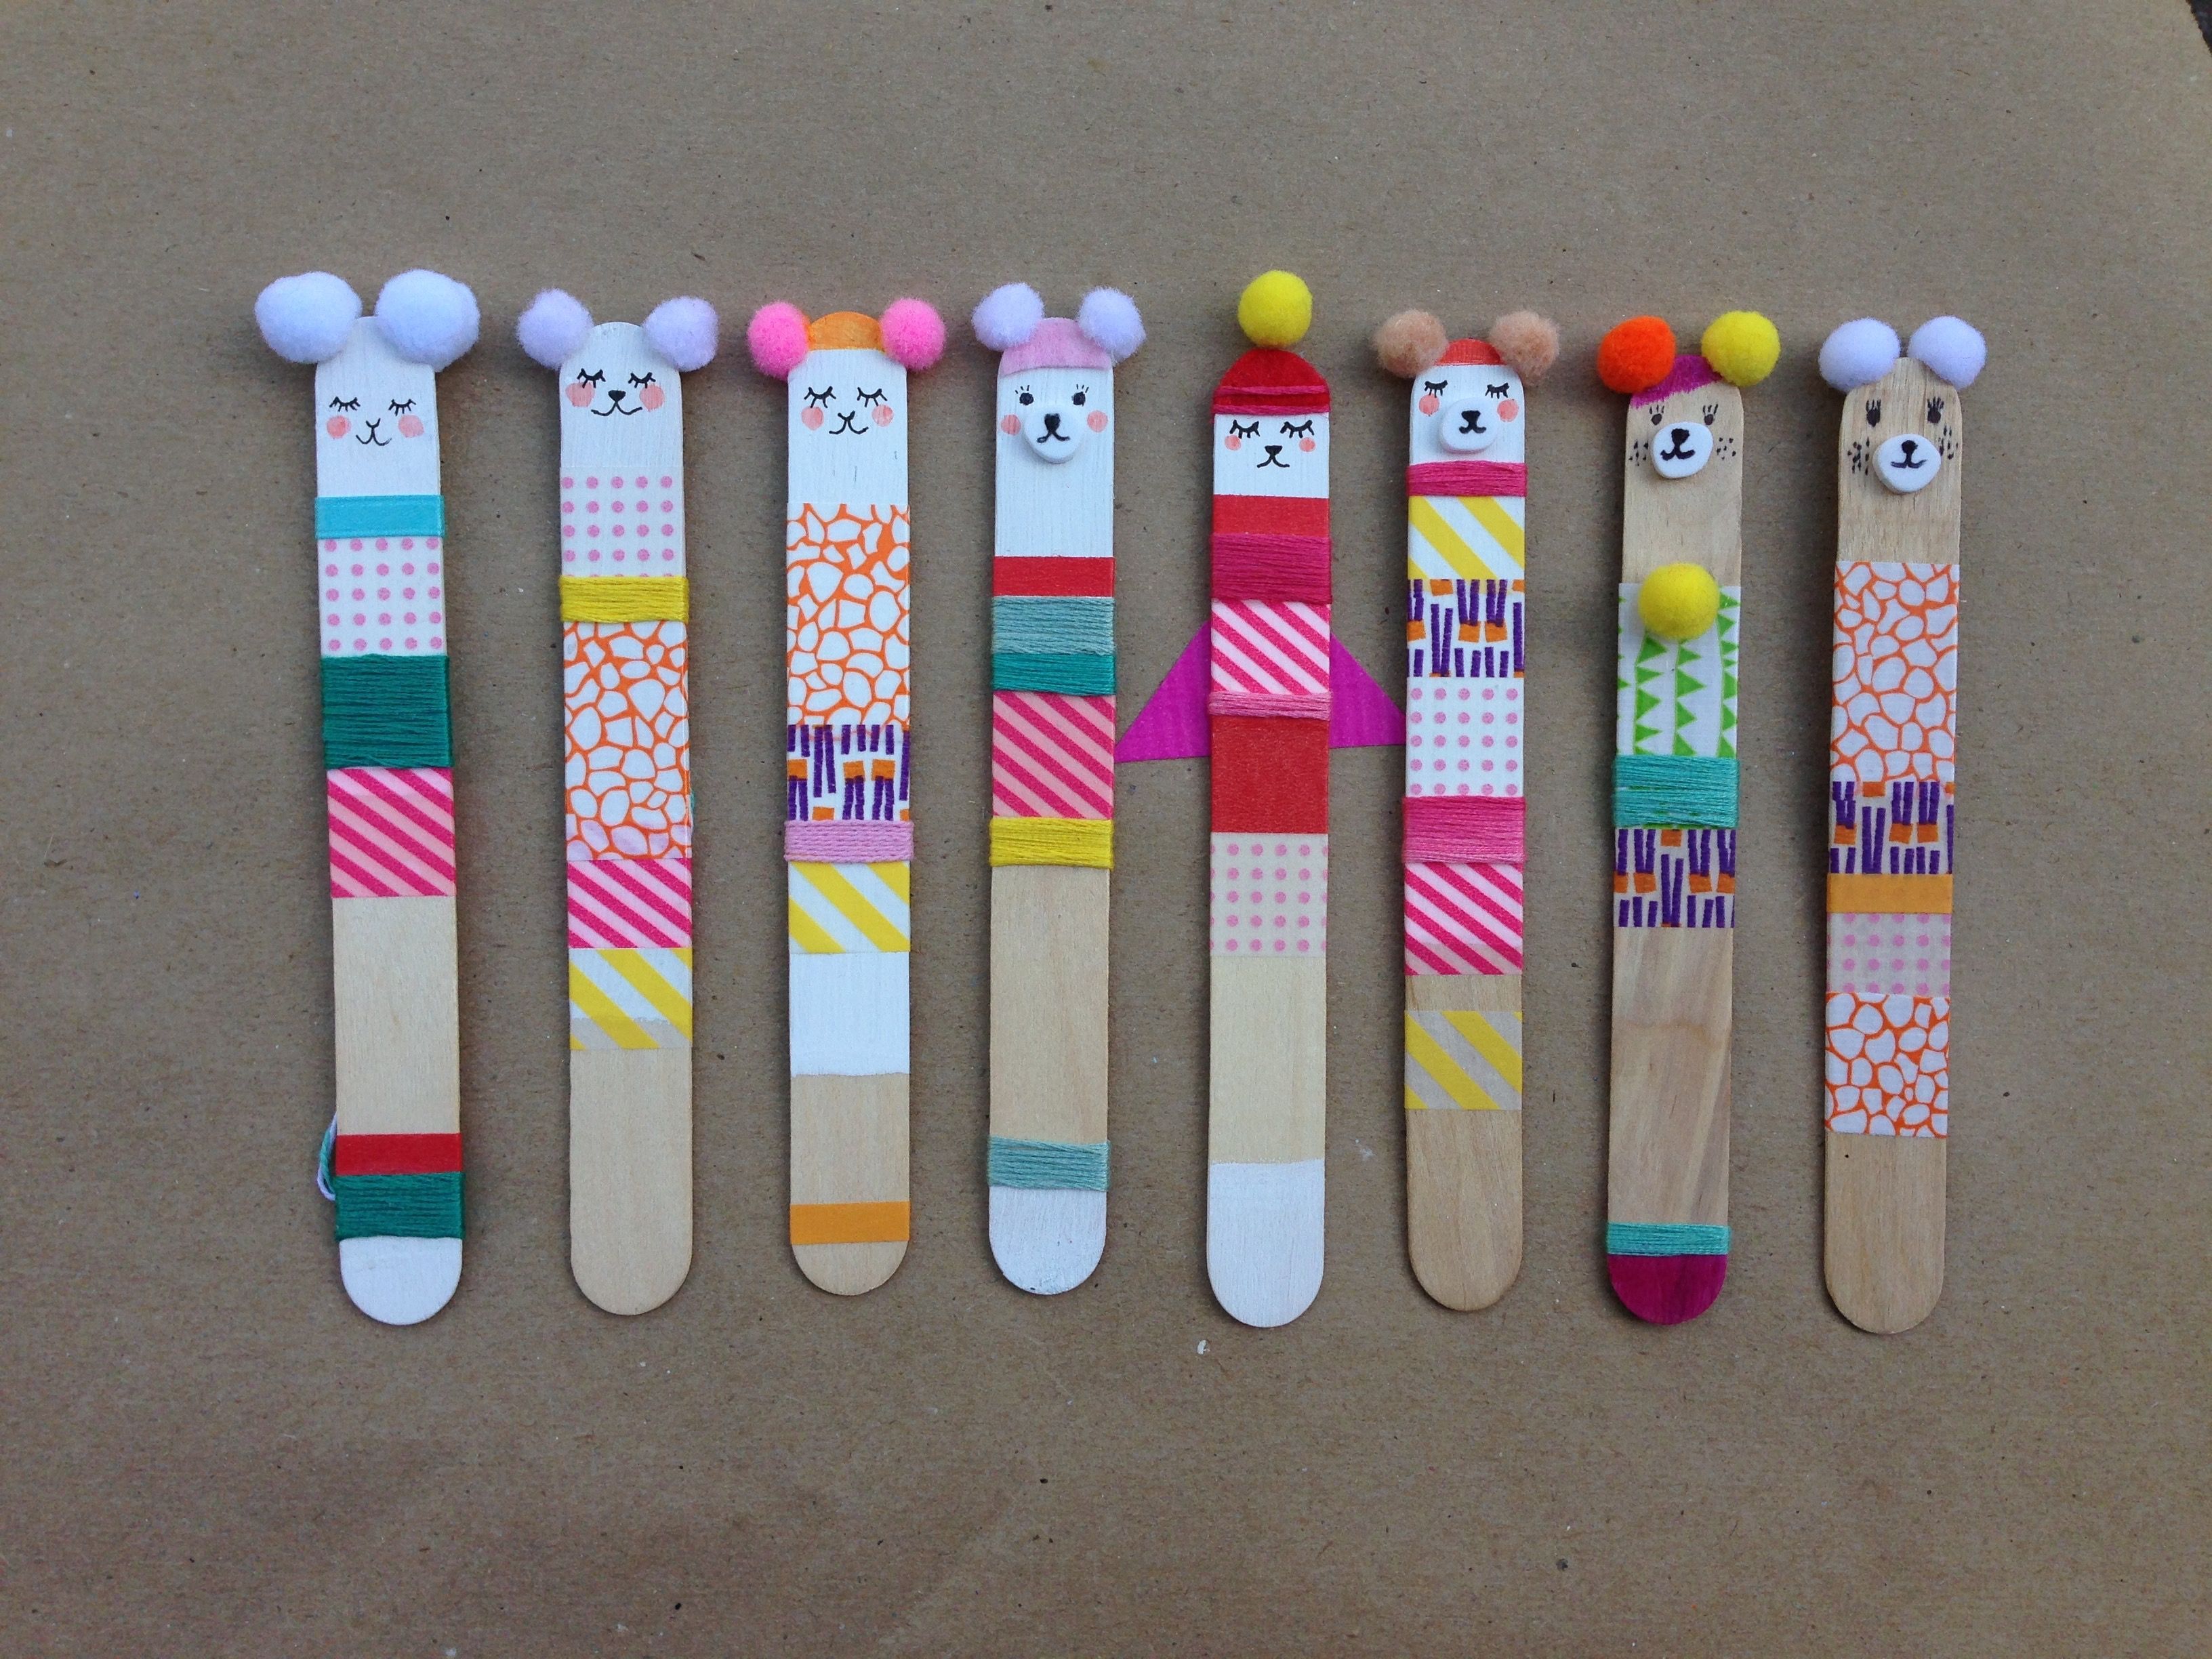 i made these with popsicle sticks, wash tape & pom-poms. we use them as bookmarks and christmas ornaments. -   24 popsicle stick bookmarks
 ideas